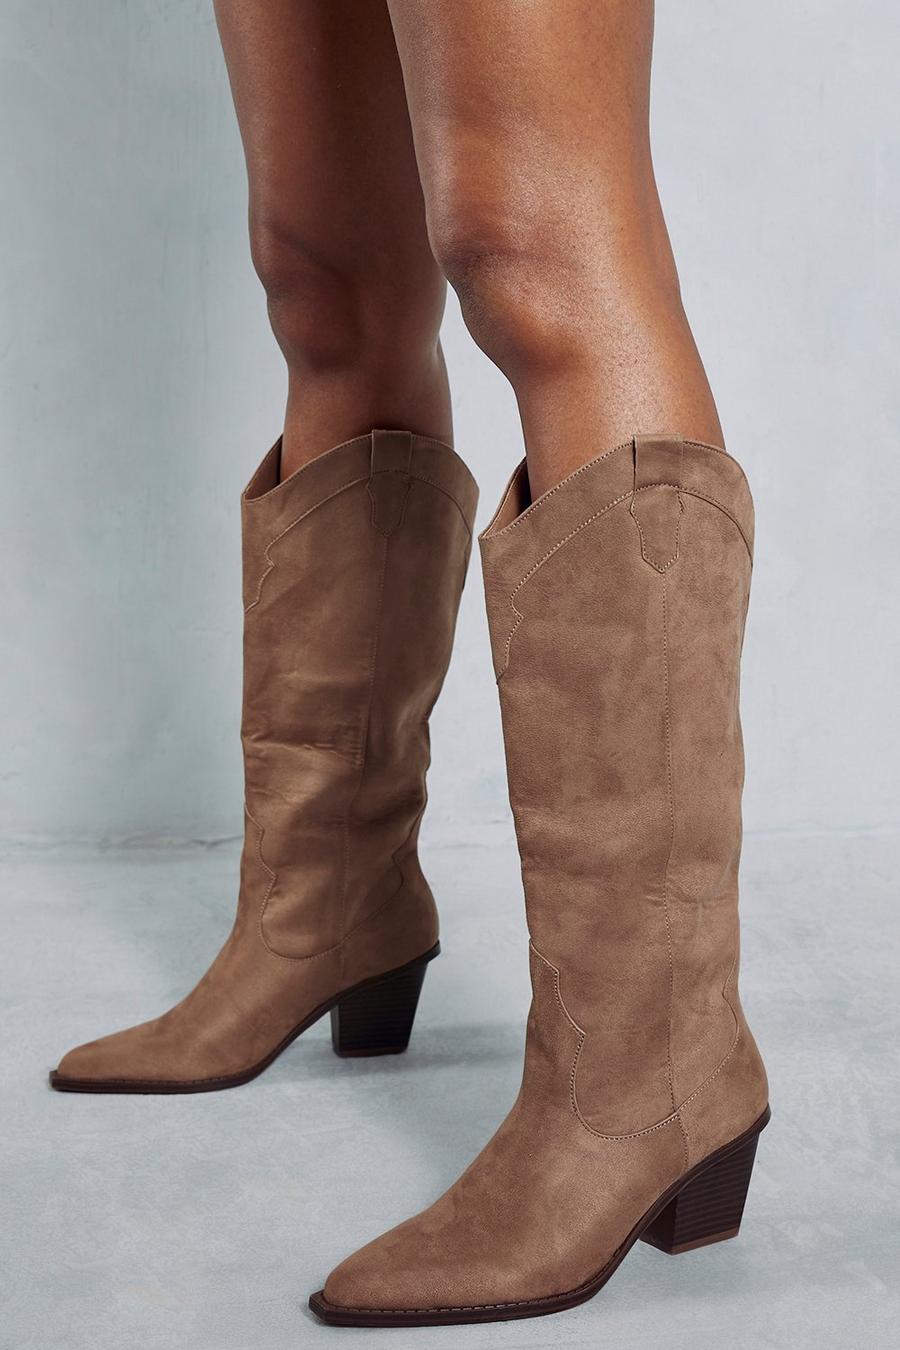 Khaki Faux Suede Knee High Western Boots